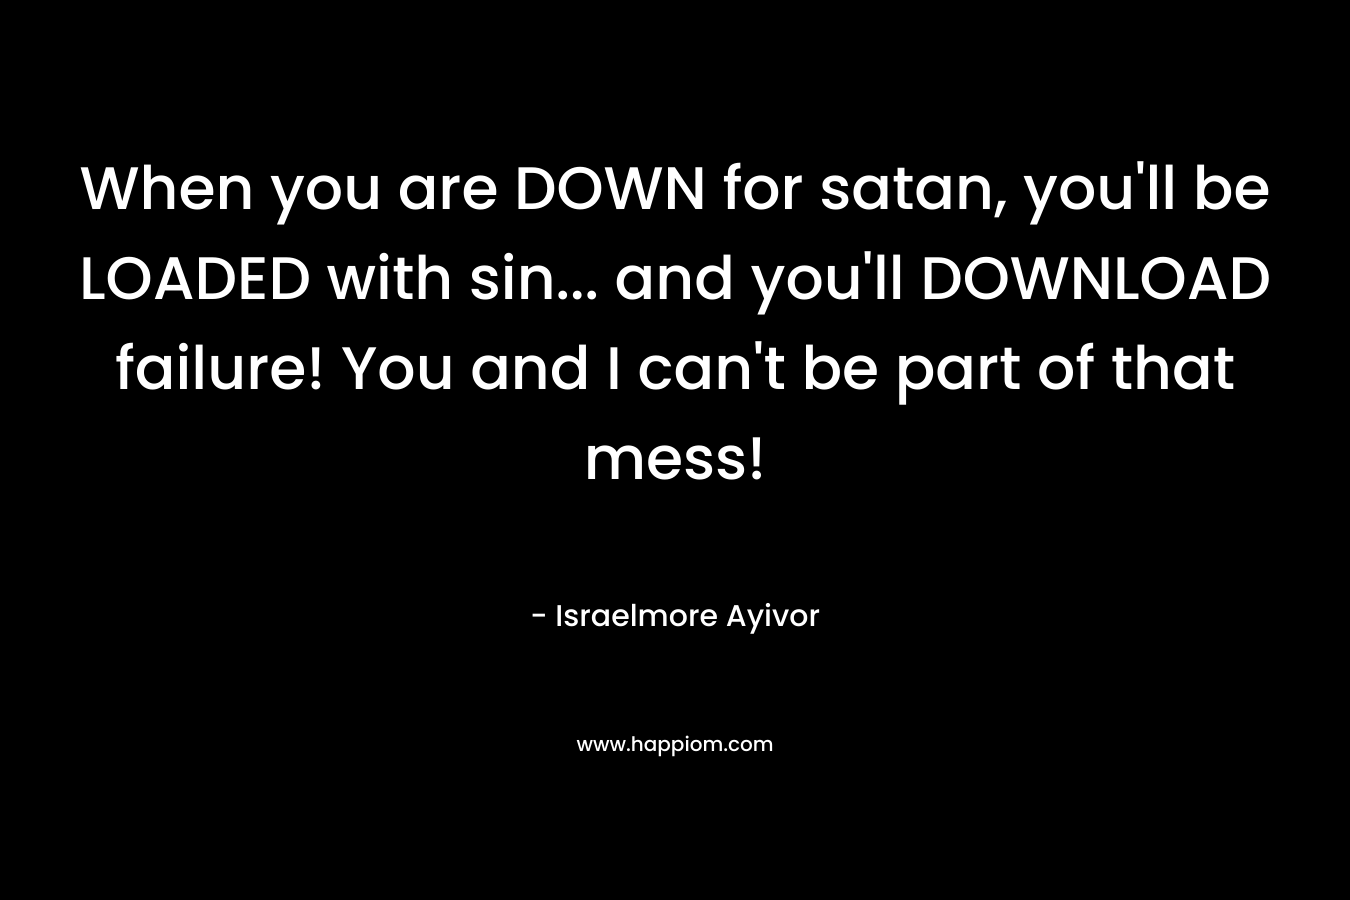 When you are DOWN for satan, you’ll be LOADED with sin… and you’ll DOWNLOAD failure! You and I can’t be part of that mess! – Israelmore Ayivor